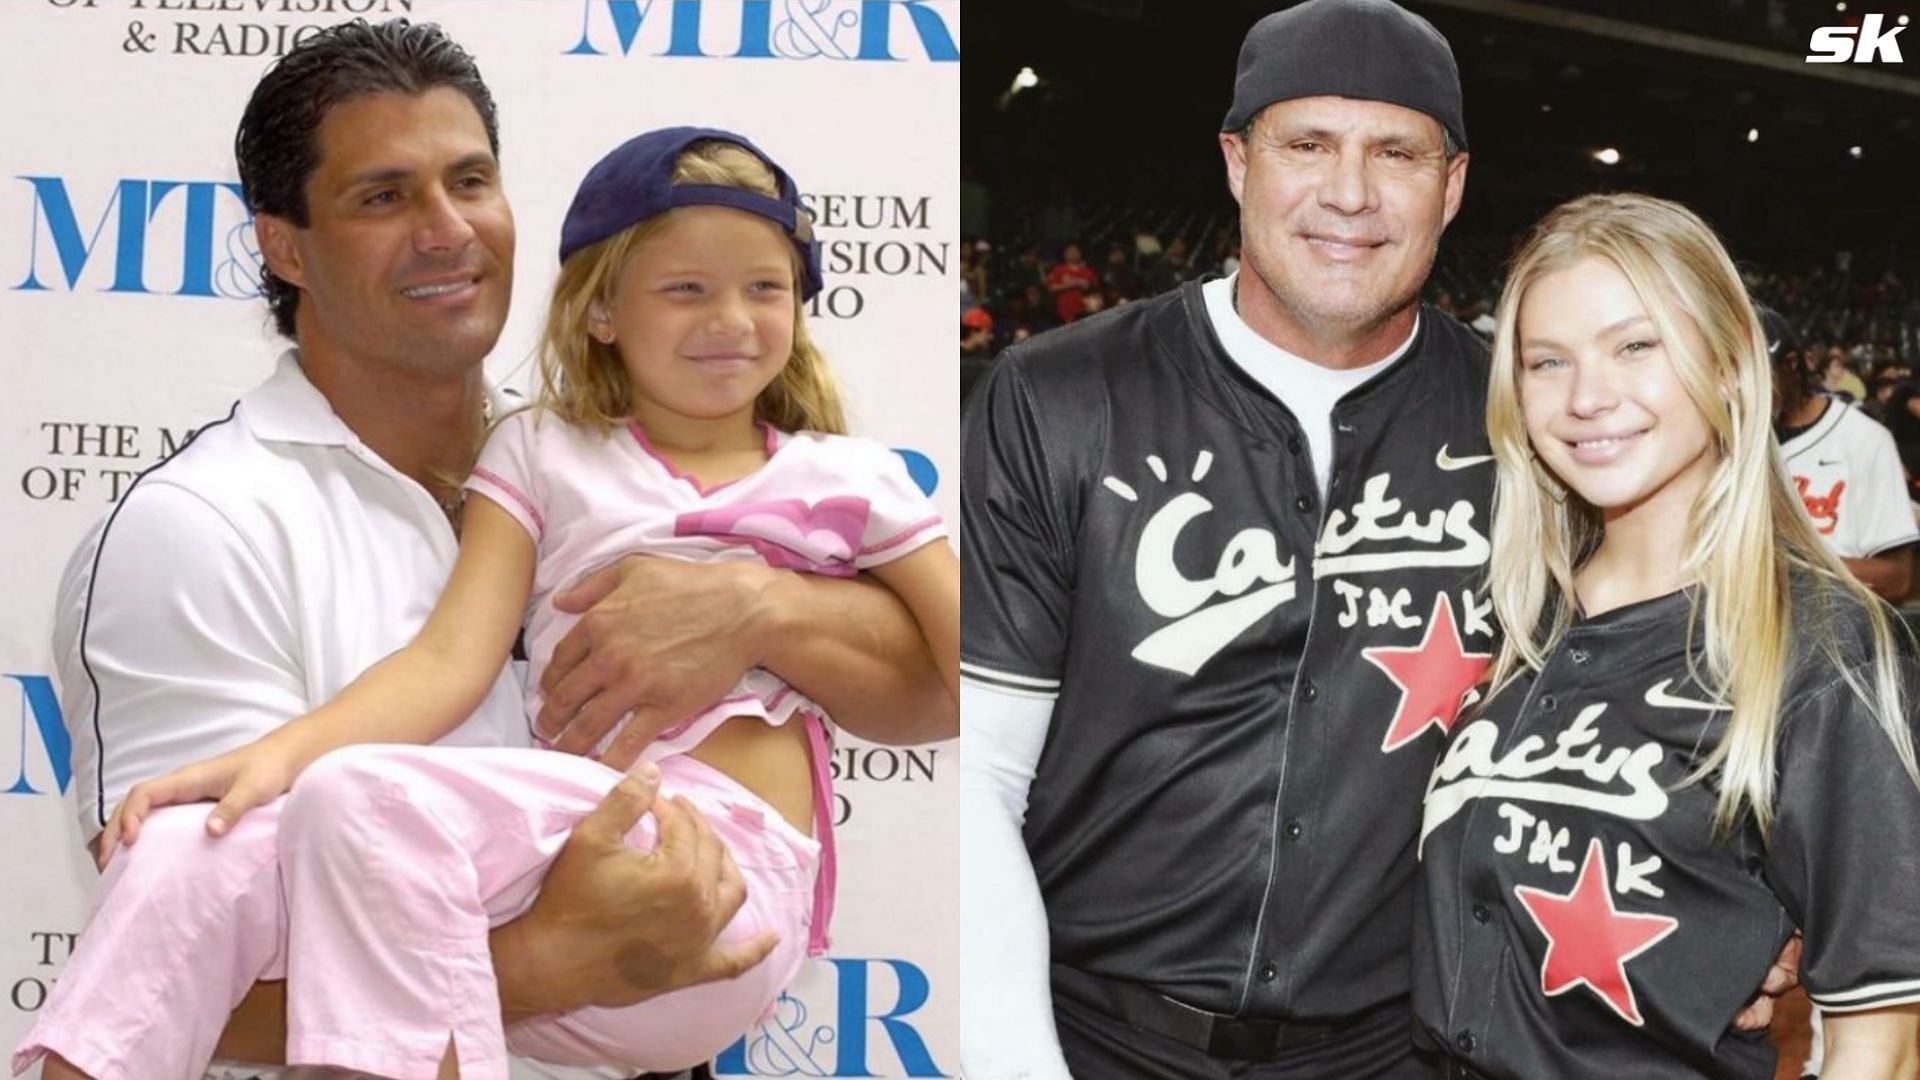 Josie Canseco wishes Jose Canseco a happy Father